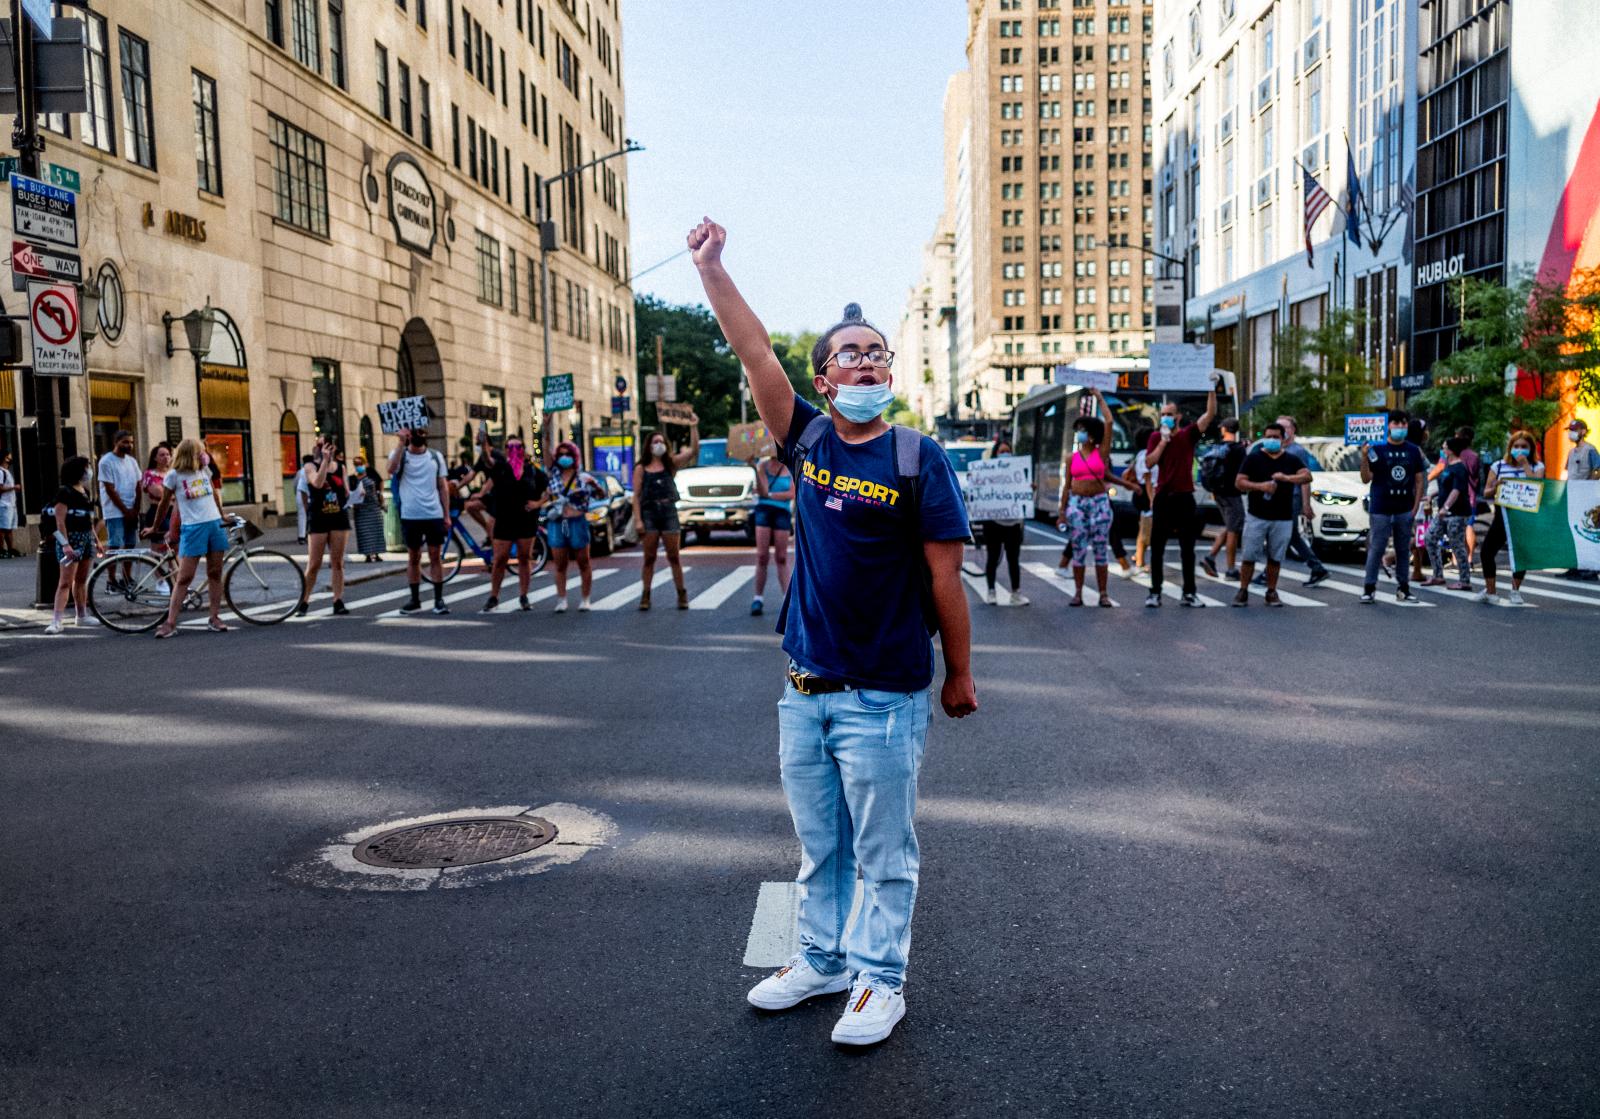 Image from Black Lives Matter -  Blocking Traffic in protest  July 5, 2020  5th...